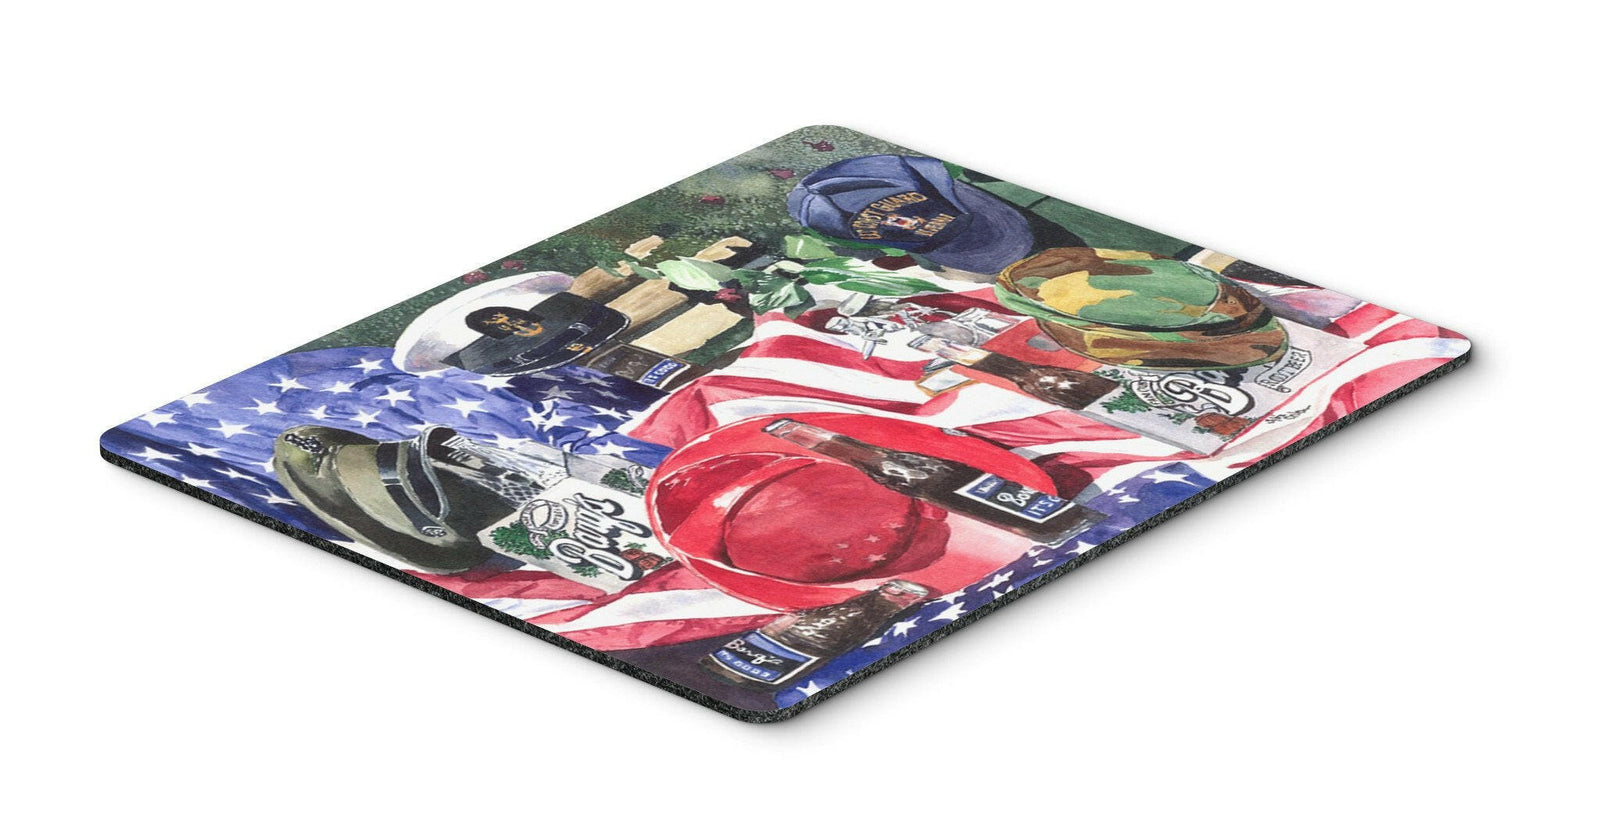 Barq's and Armed Forces Mouse pad, hot pad, or trivet by Caroline's Treasures